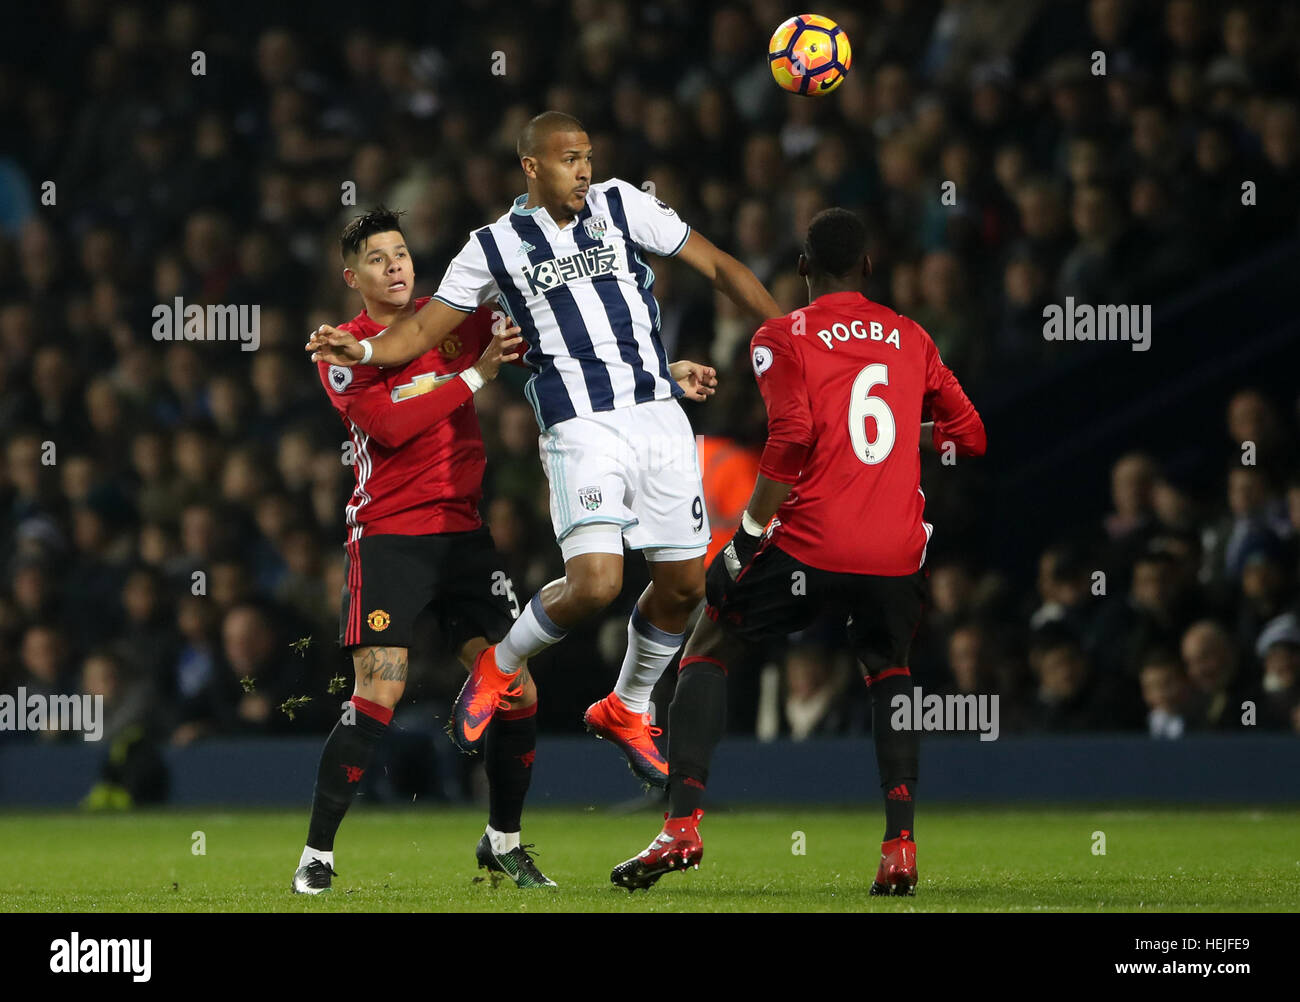 Manchester United's Marcos Rojo, West Bromwich Albion's Jose Salomon  Rondon, and Manchester United's Paul Pogba battle for the ball during the  Premier League match at The Hawthorns, West Bromwich Stock Photo -